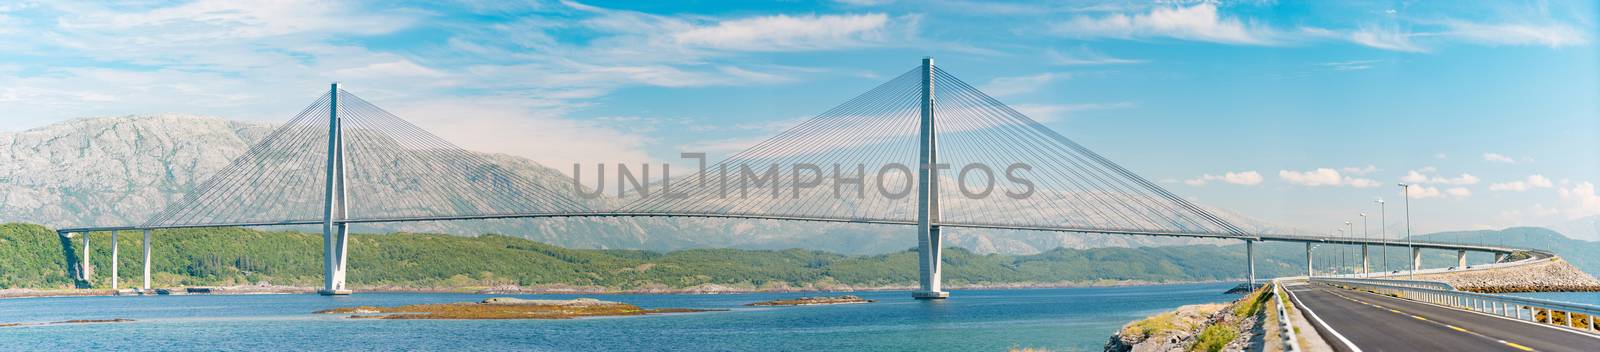 Panorama of bridge and car road in Norway, Europe. Auto travel through scandinavia. Blue cloudy sky, lake and bridge in background.